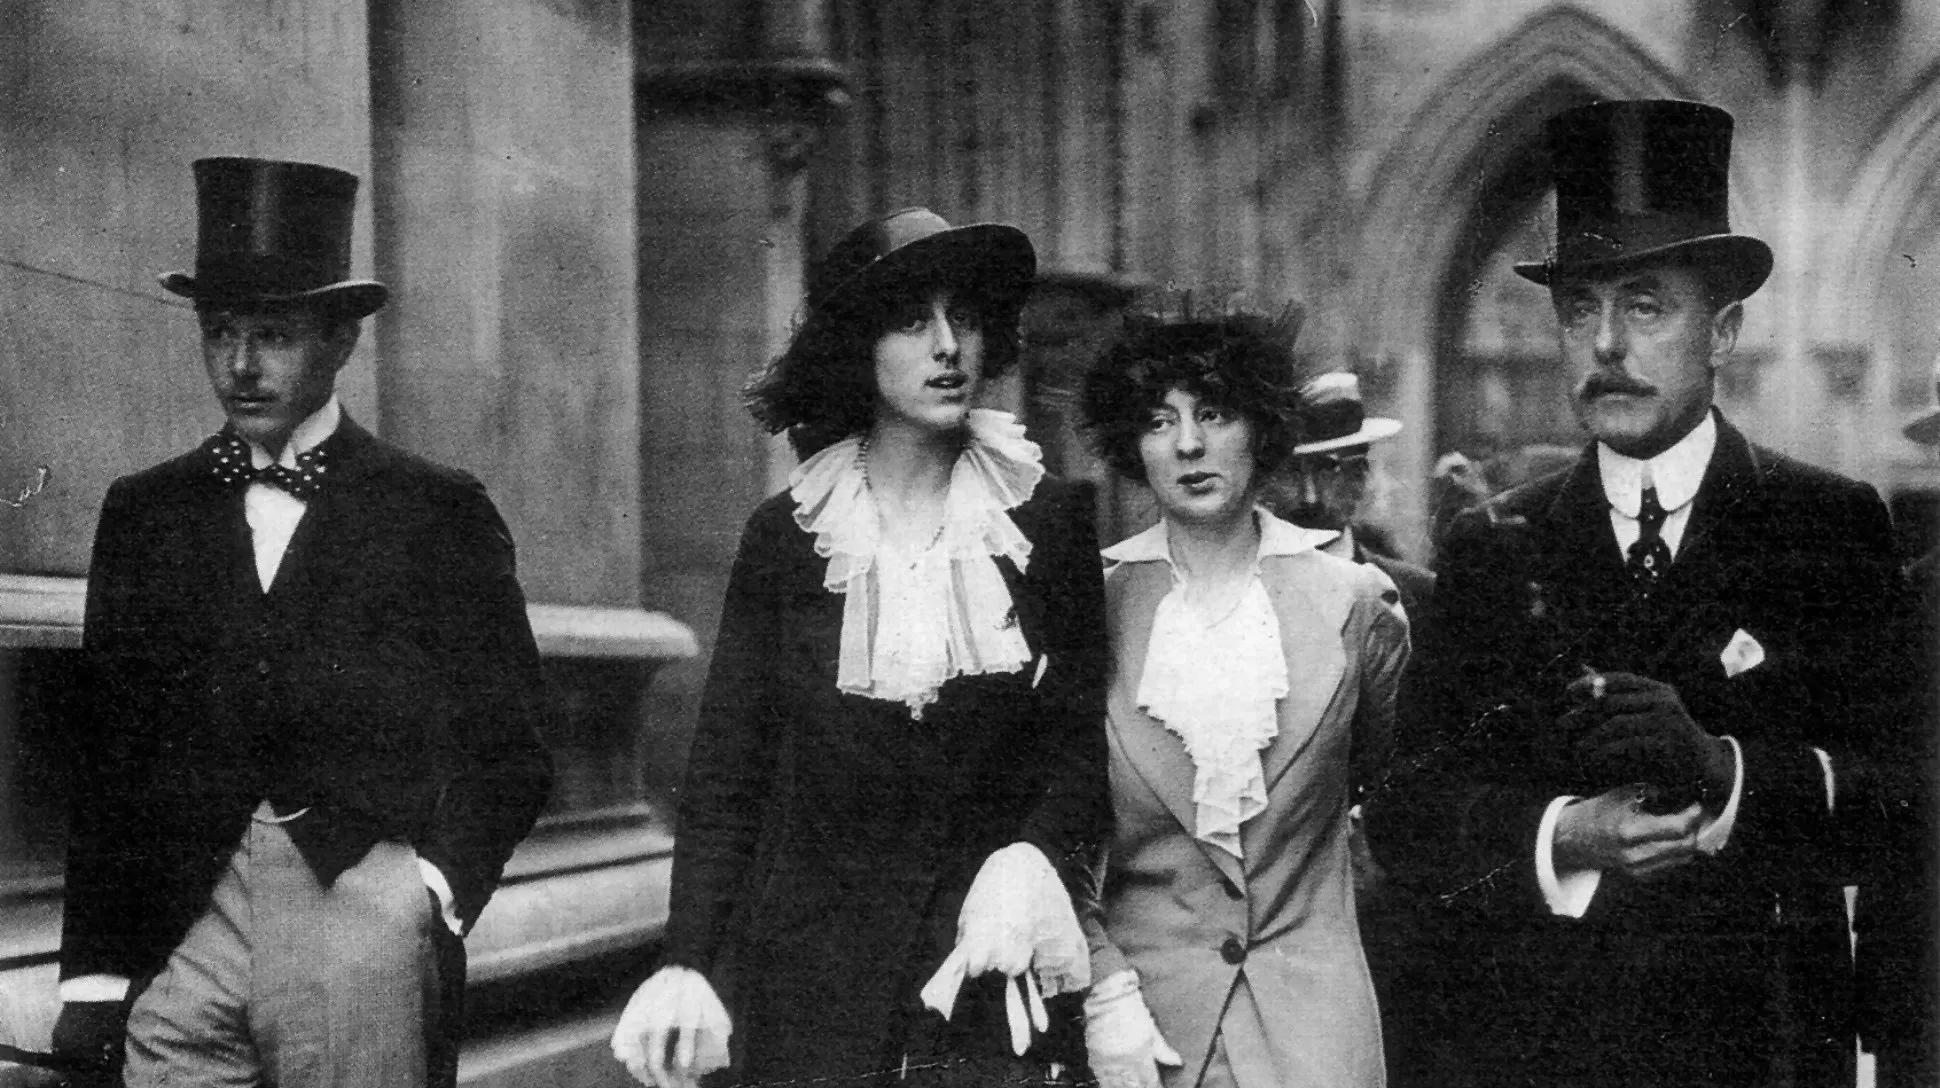 A black and white photo of four people walking down the street, with Vita Sackville West in the middle